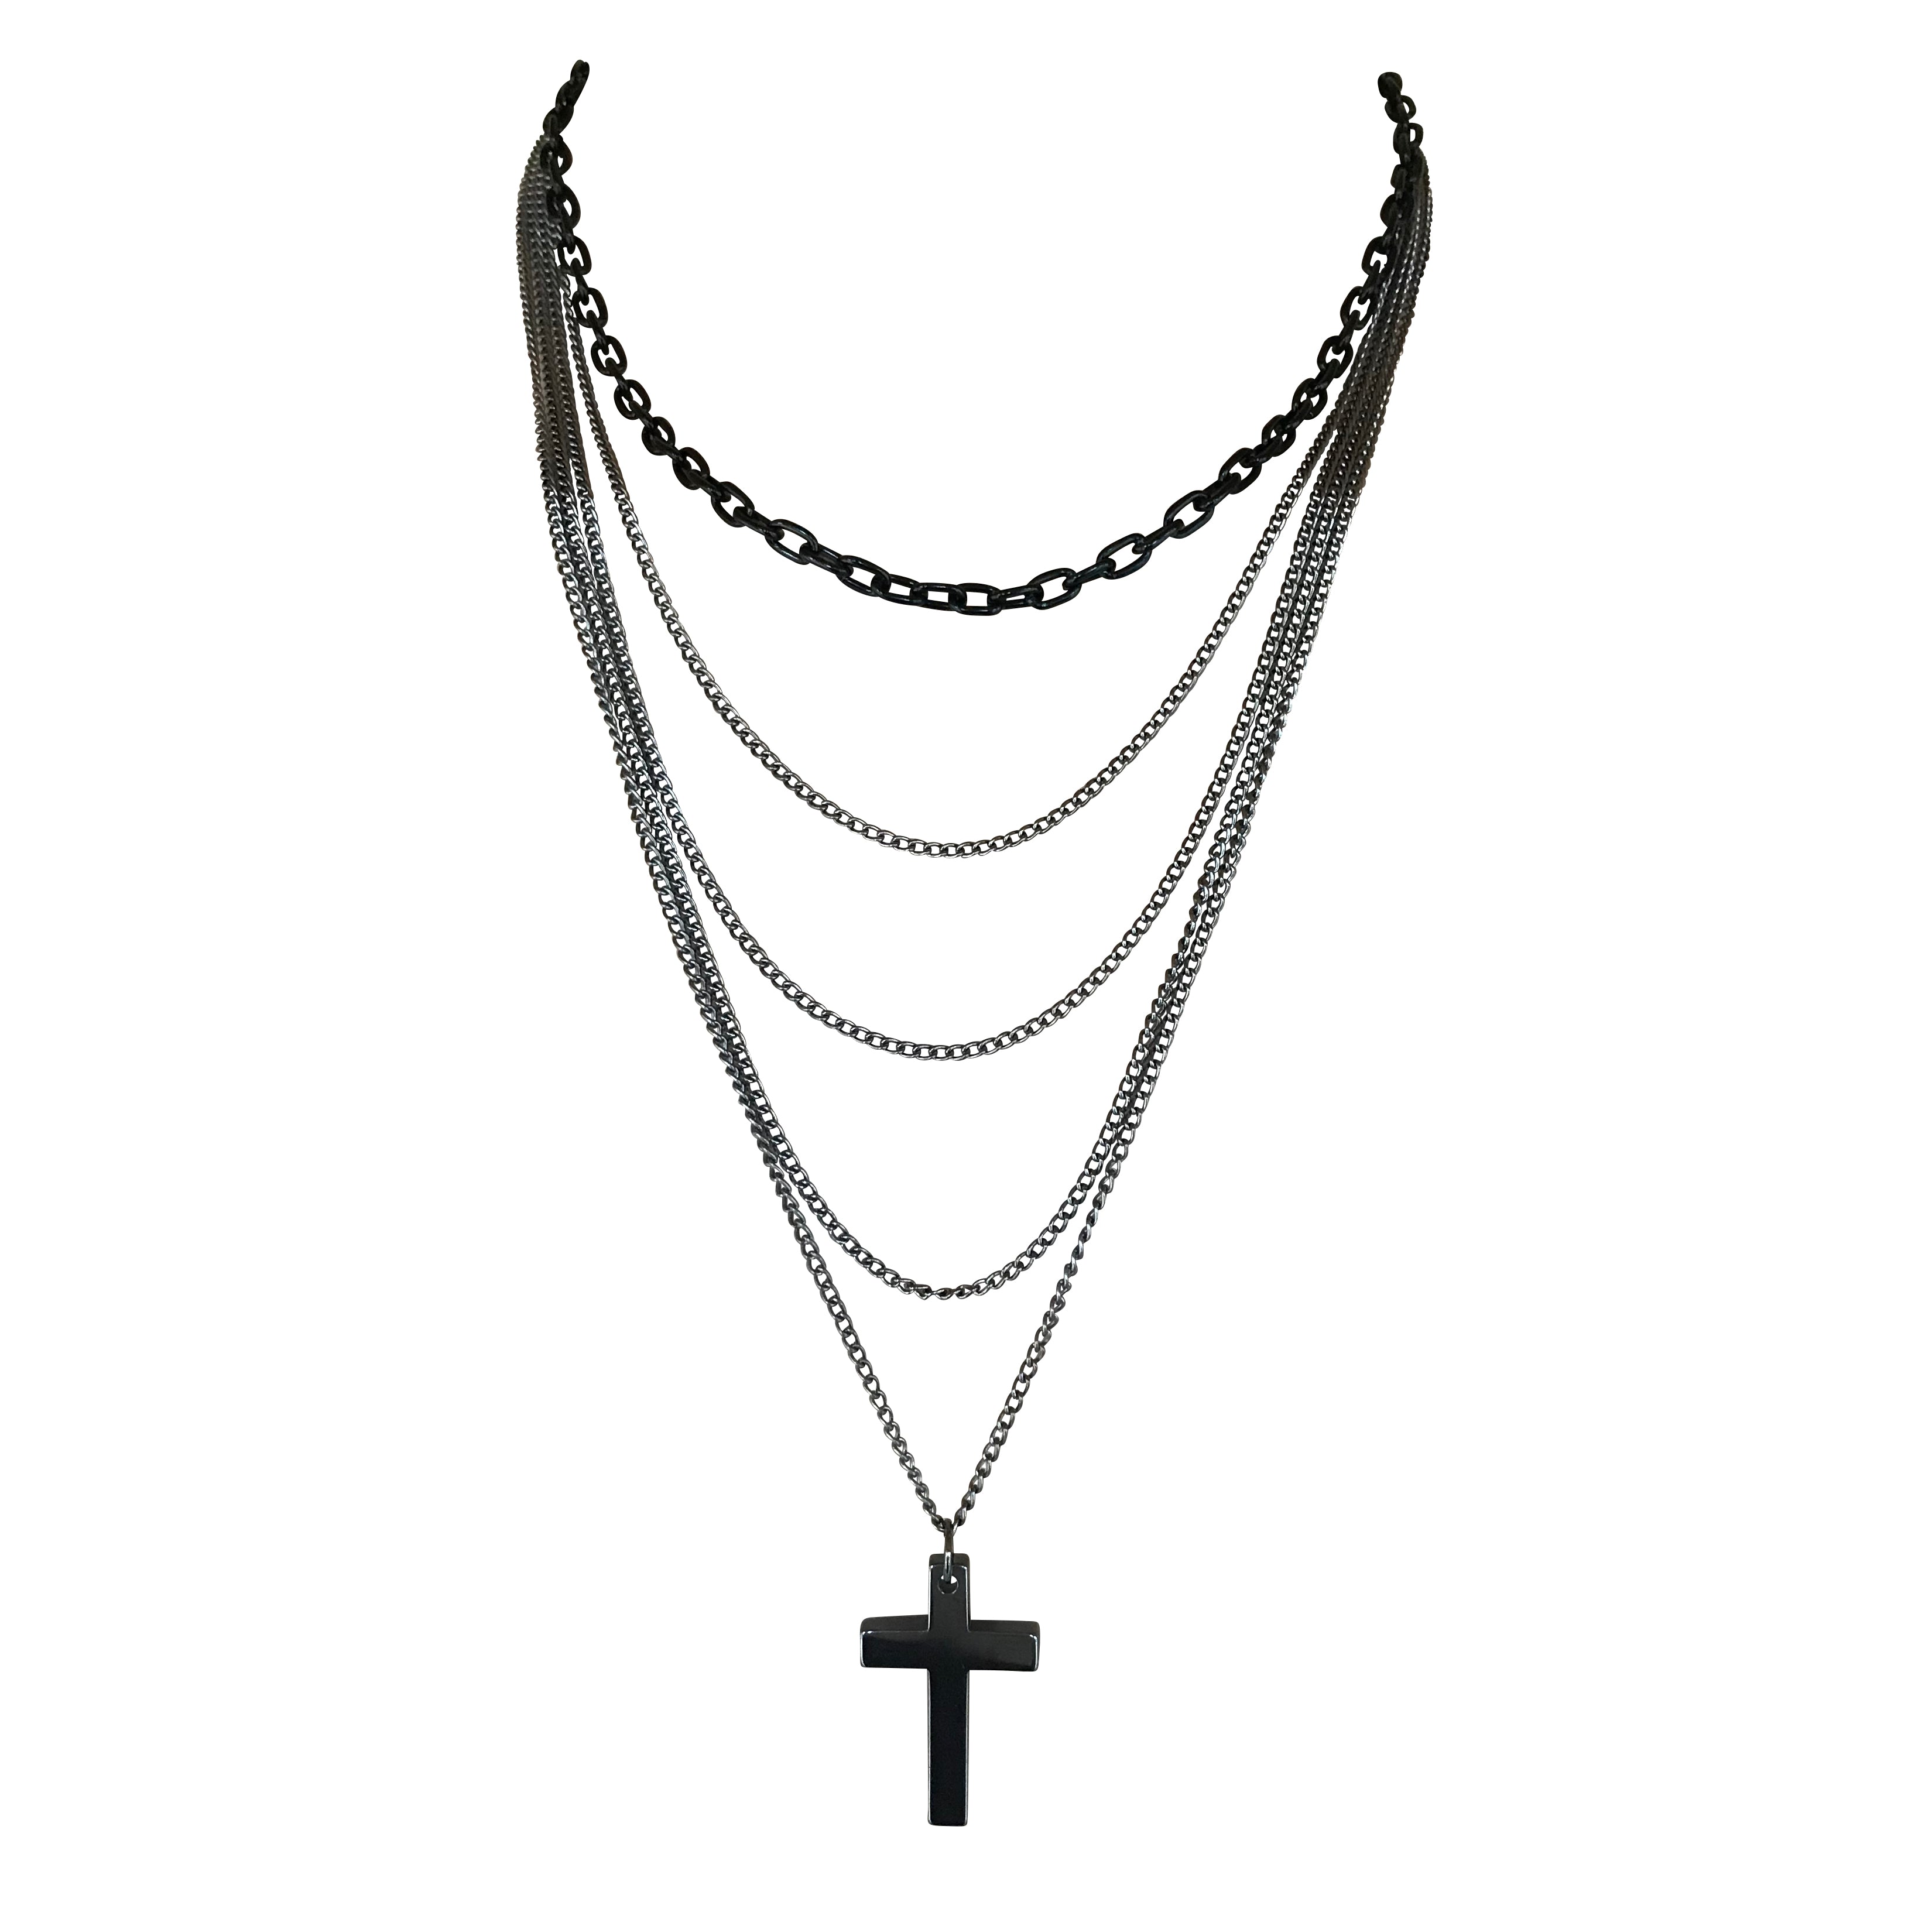 BLACK JEWELRY CHAIN NECKLACE - WILL SHIP!!